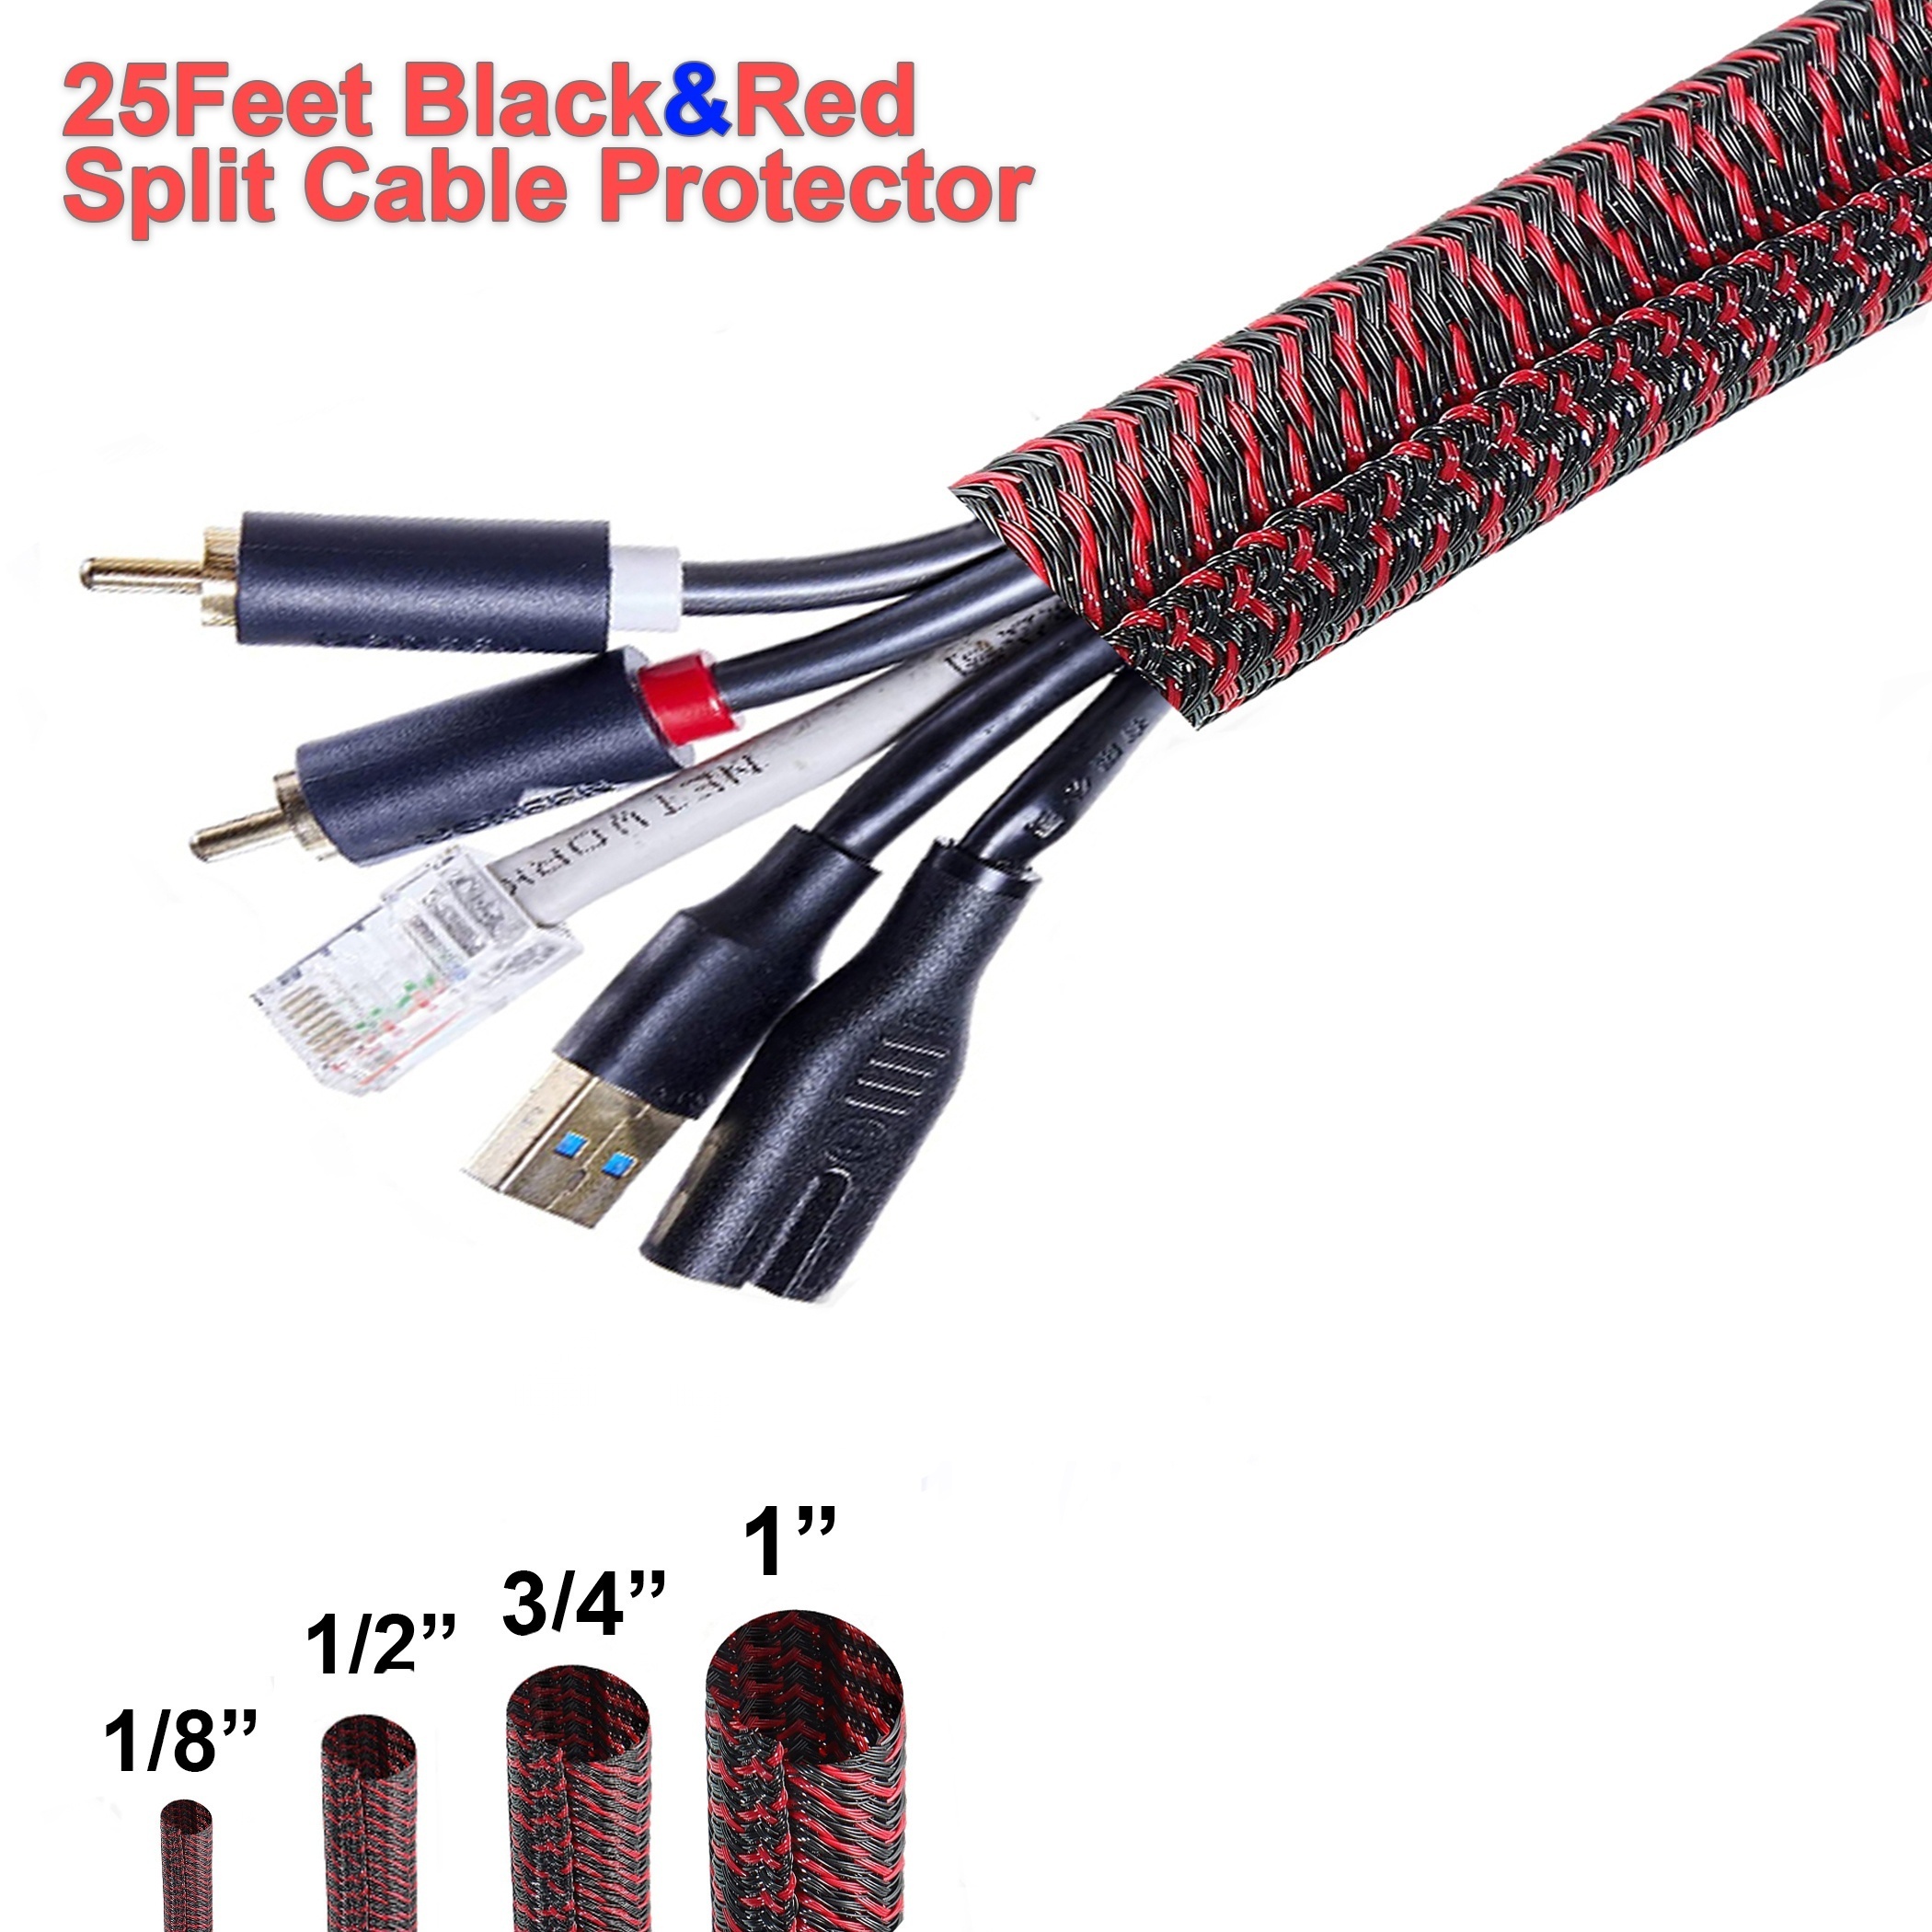 1pc 25feet Braided Cable Sleeve Flexible Self Wrapping Split Electrical  Cable Cover Protection And Organization Wire